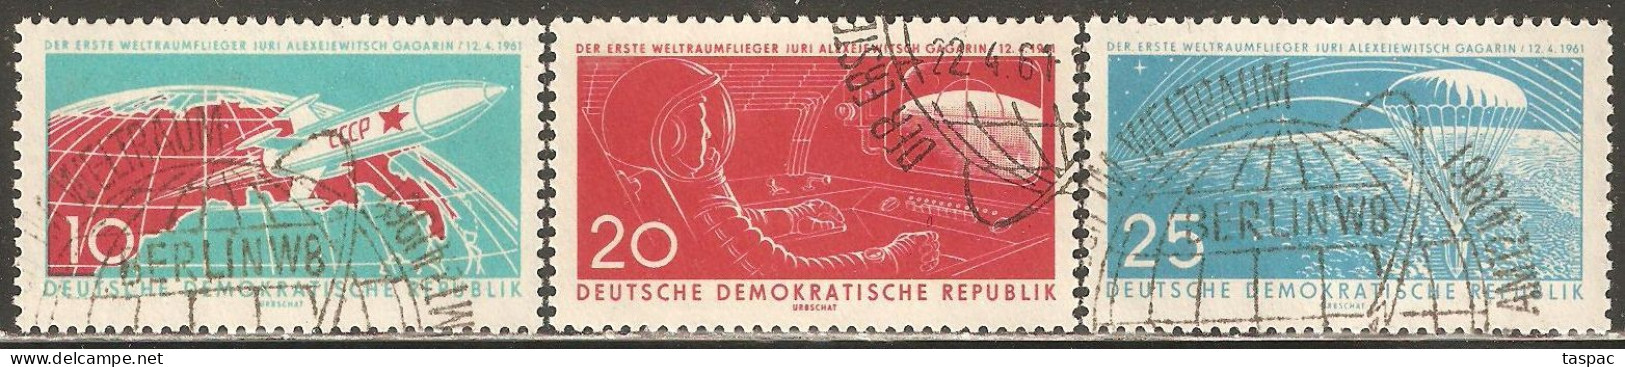 East Germany / DDR 1961 Mi# 822-824 Used - Vostok 1 / Yuri A. Gagarin / Space - Used Stamps